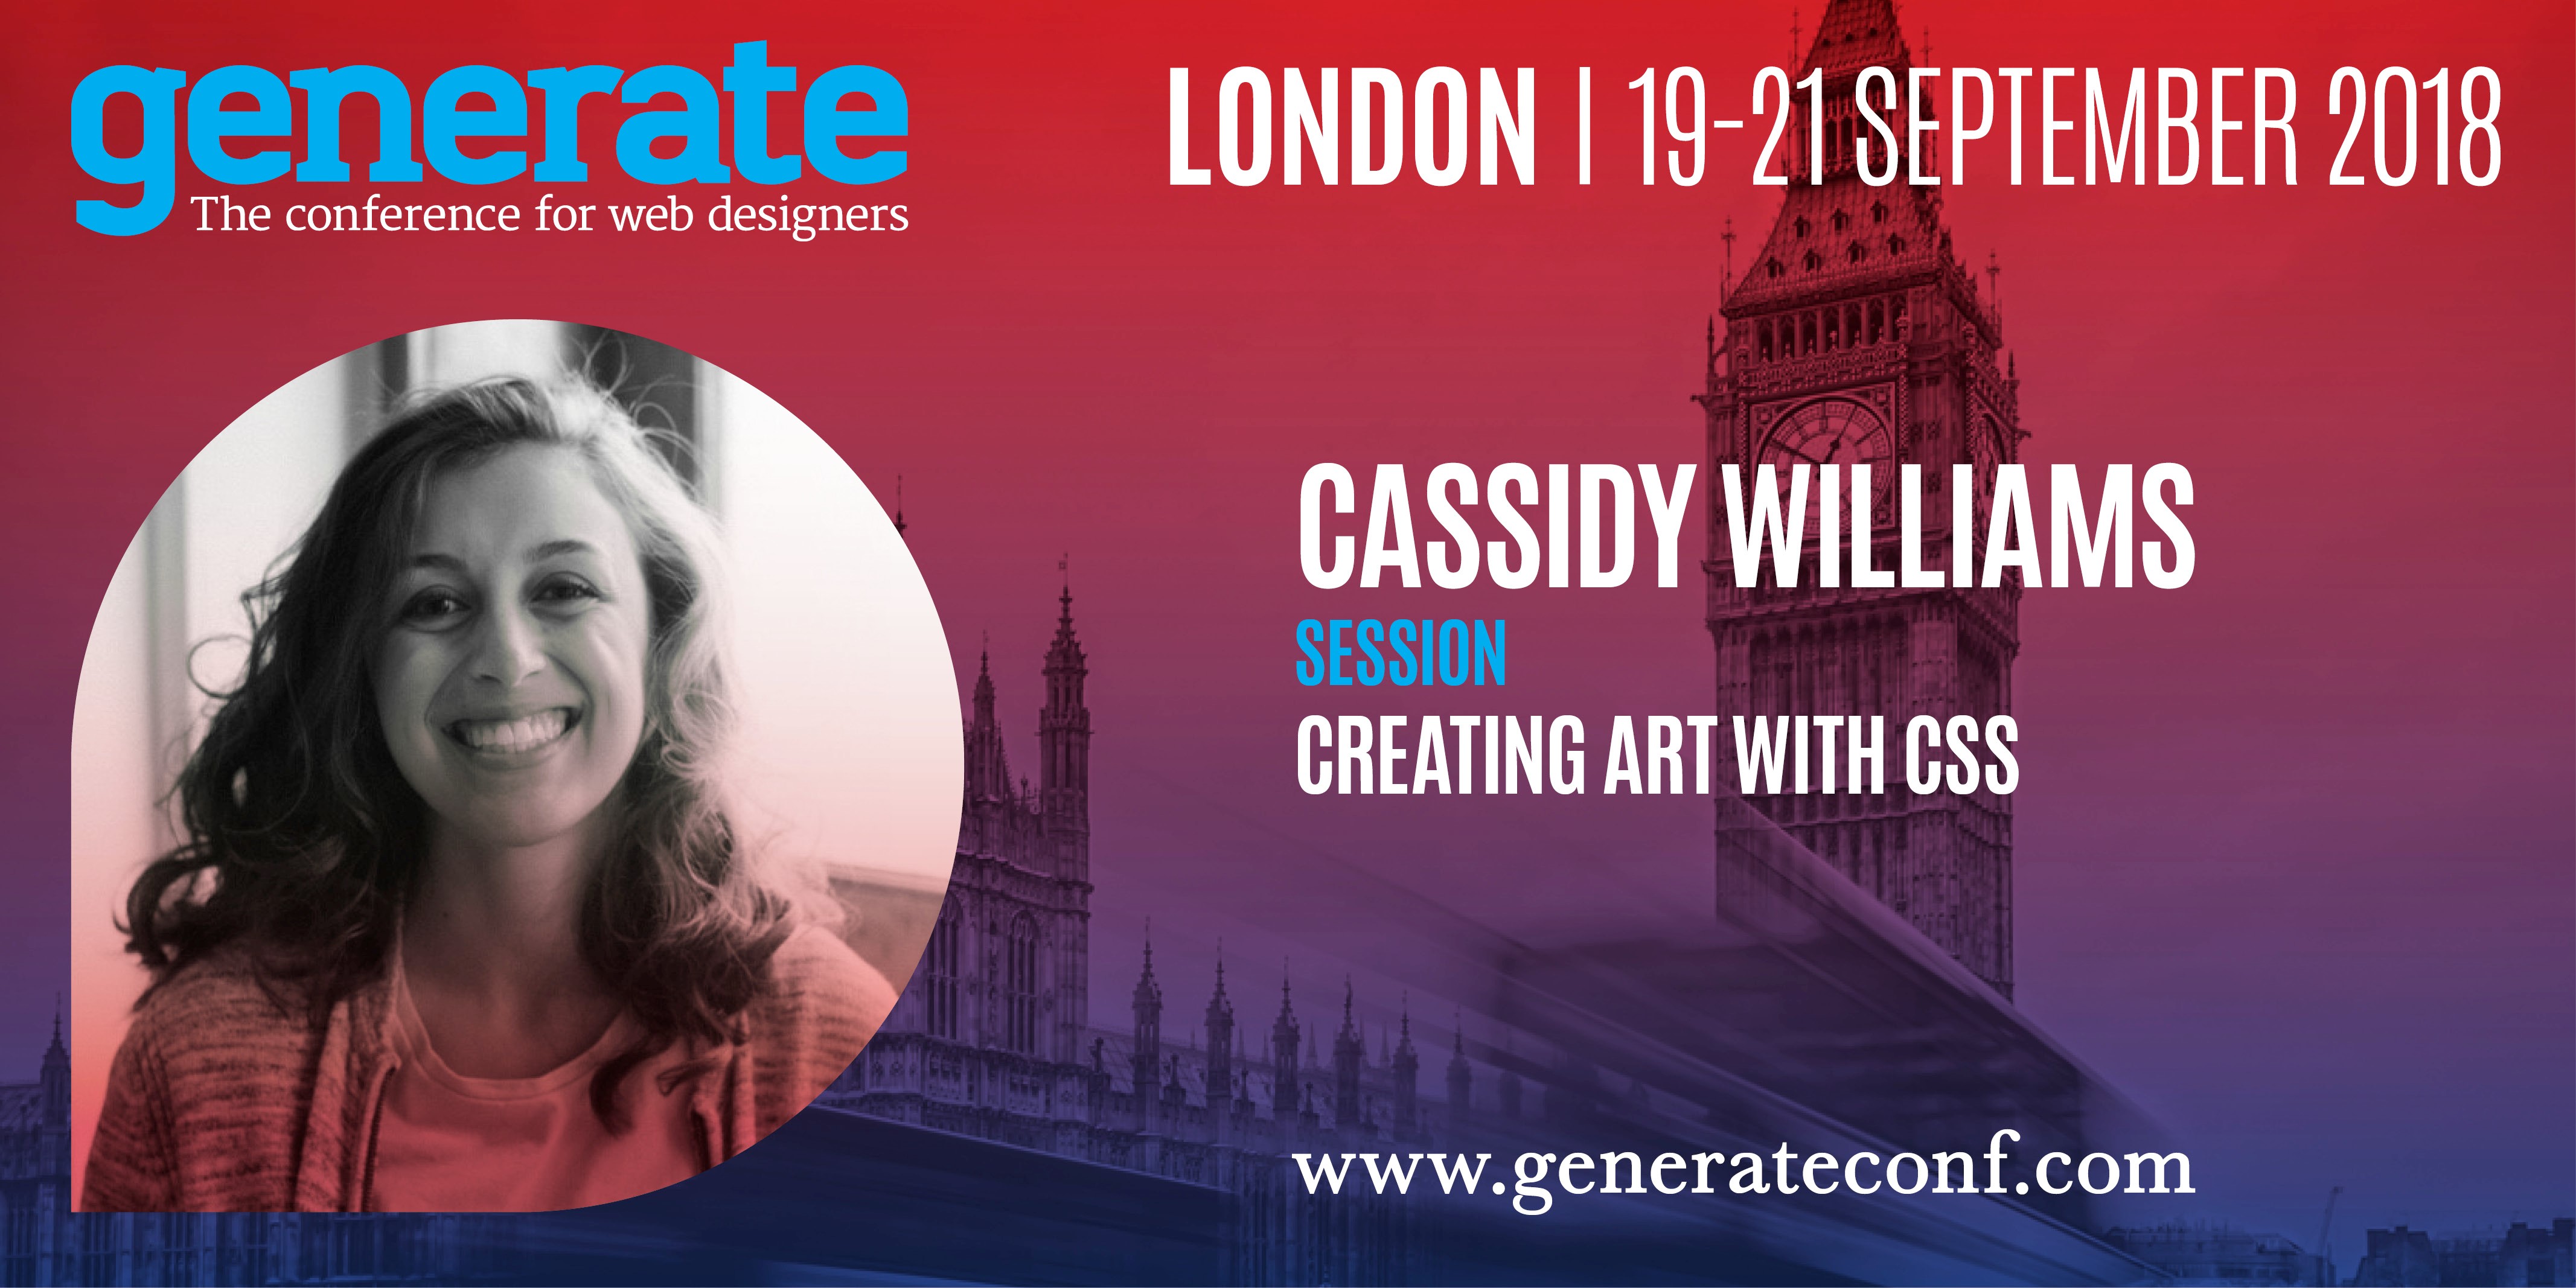 Cassidy Williams' talk 'Creating Art with CSS' will be appearing at Generate London 19 - 21 September 2018.